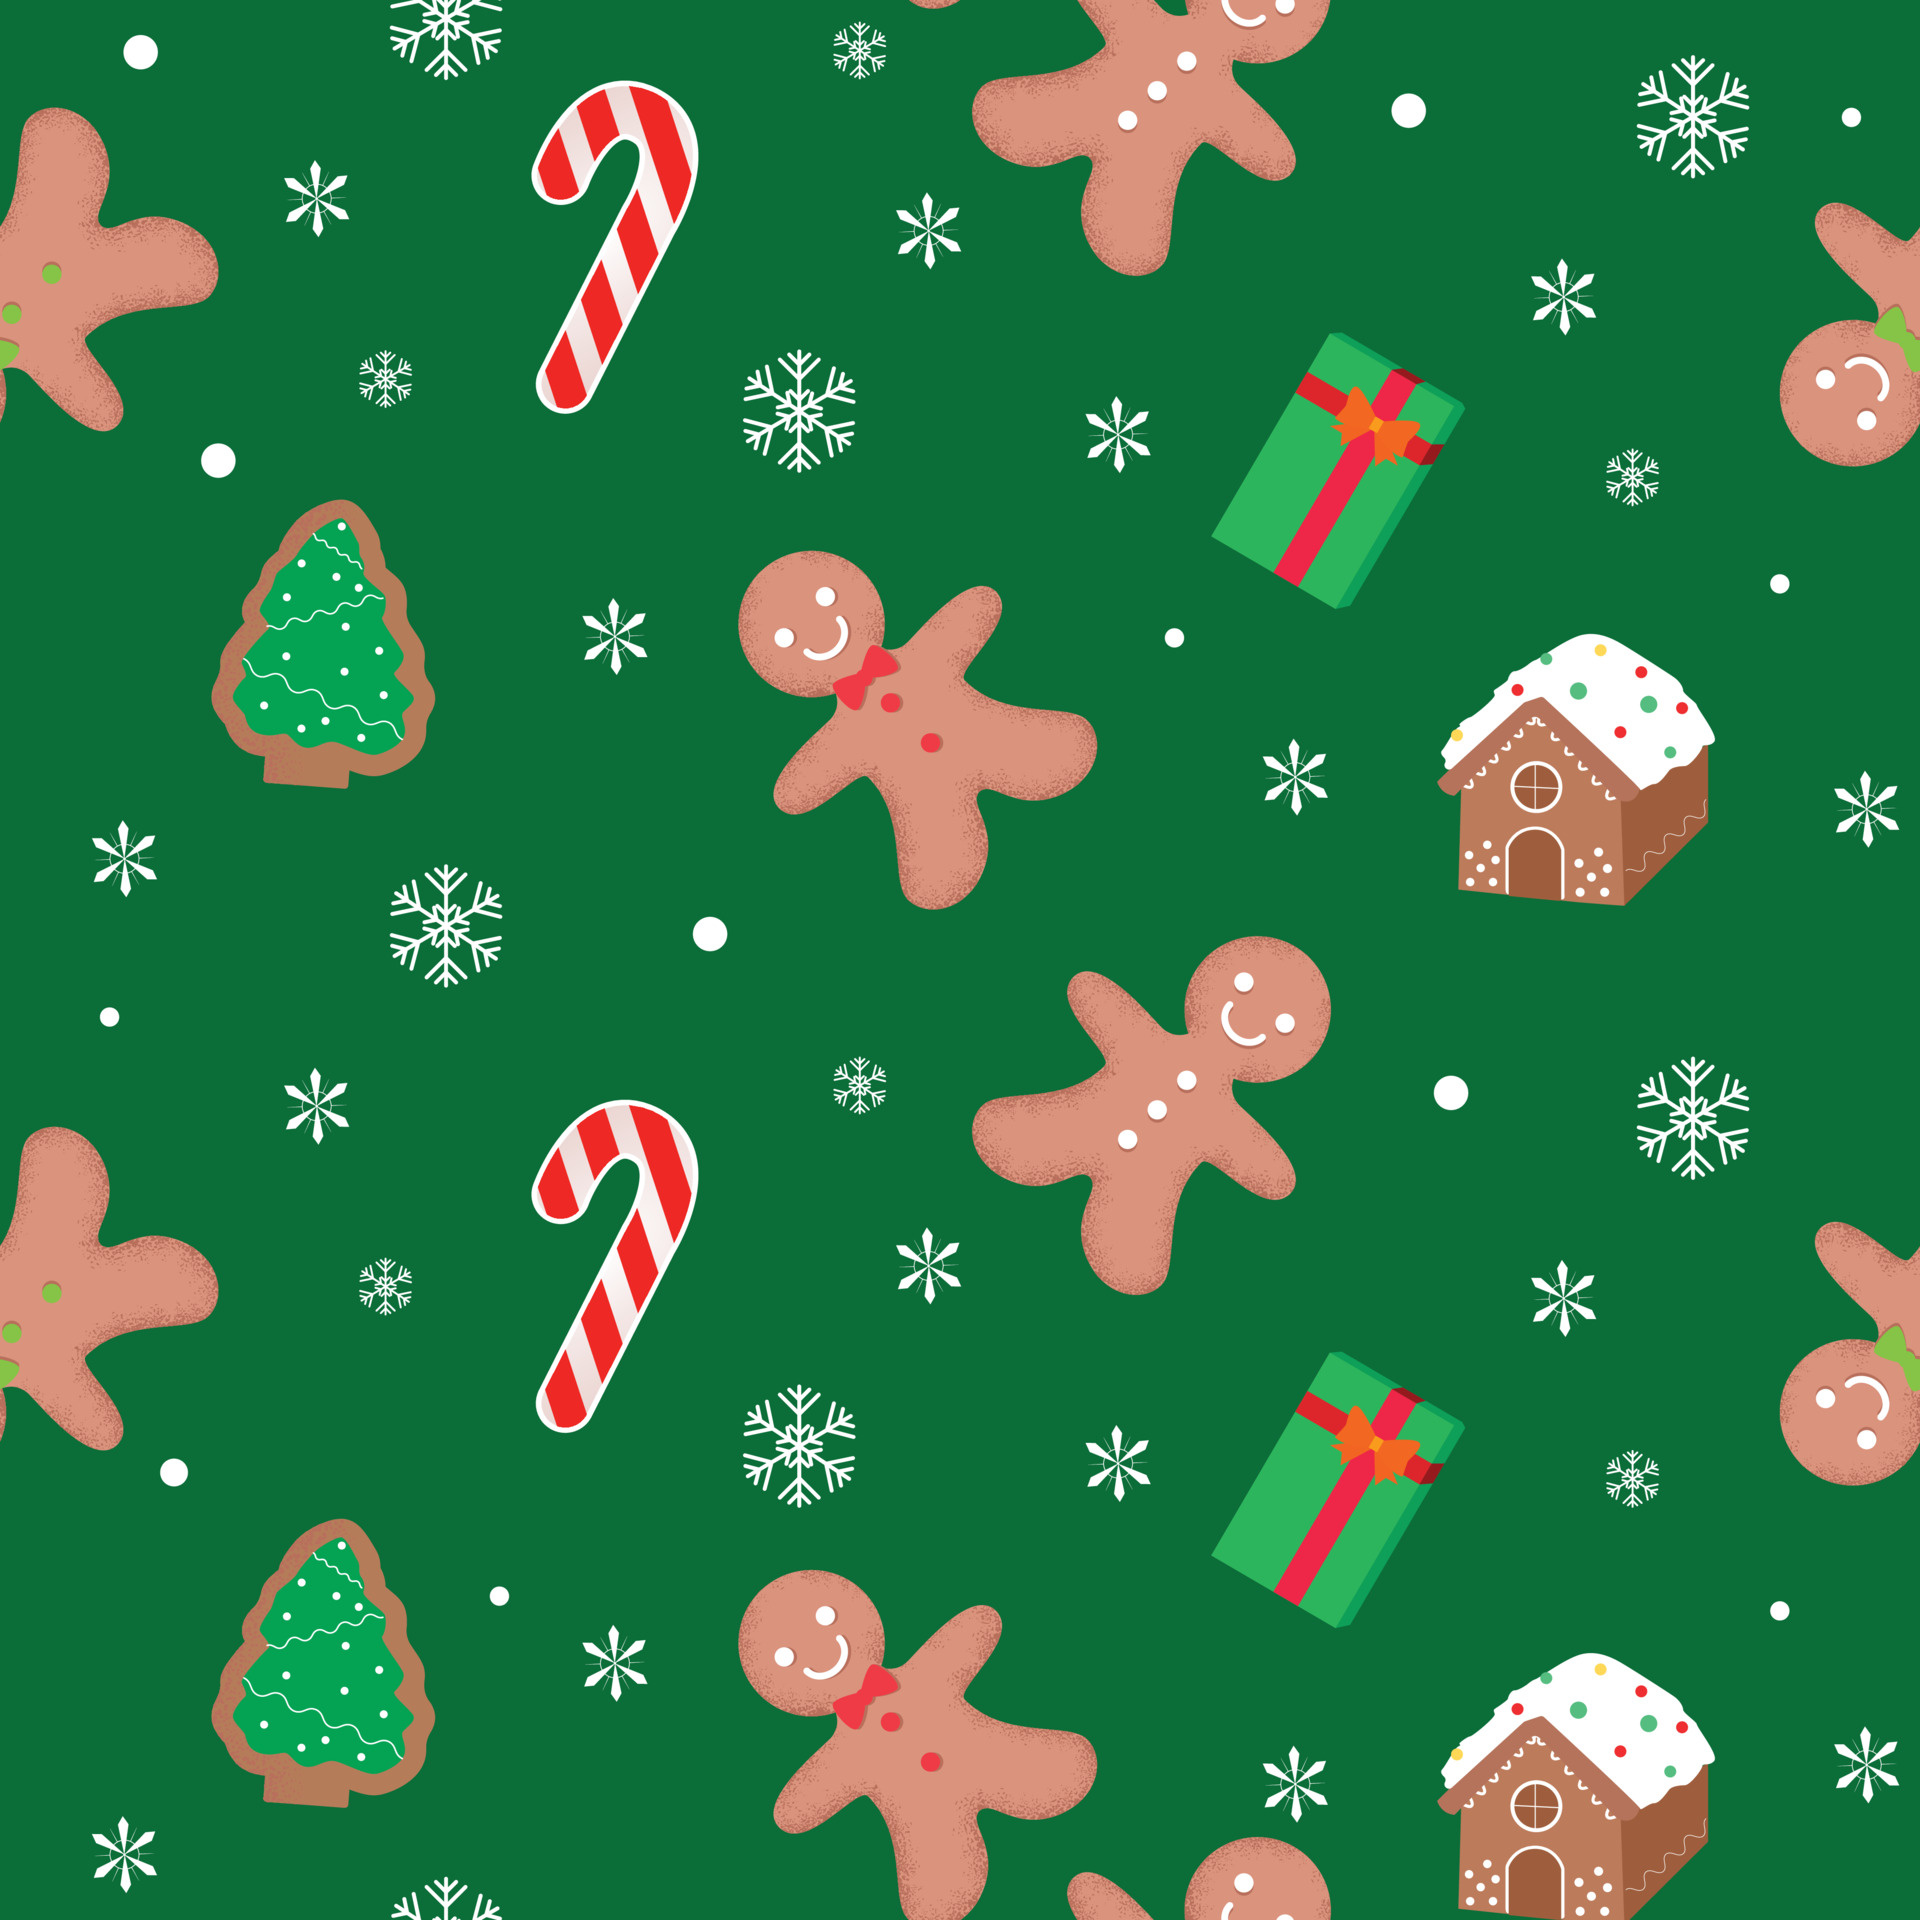 Gingerbread Man, Festive house and cookie pattern, Winter-themed design, Sweet holiday motifs, 1920x1920 HD Handy